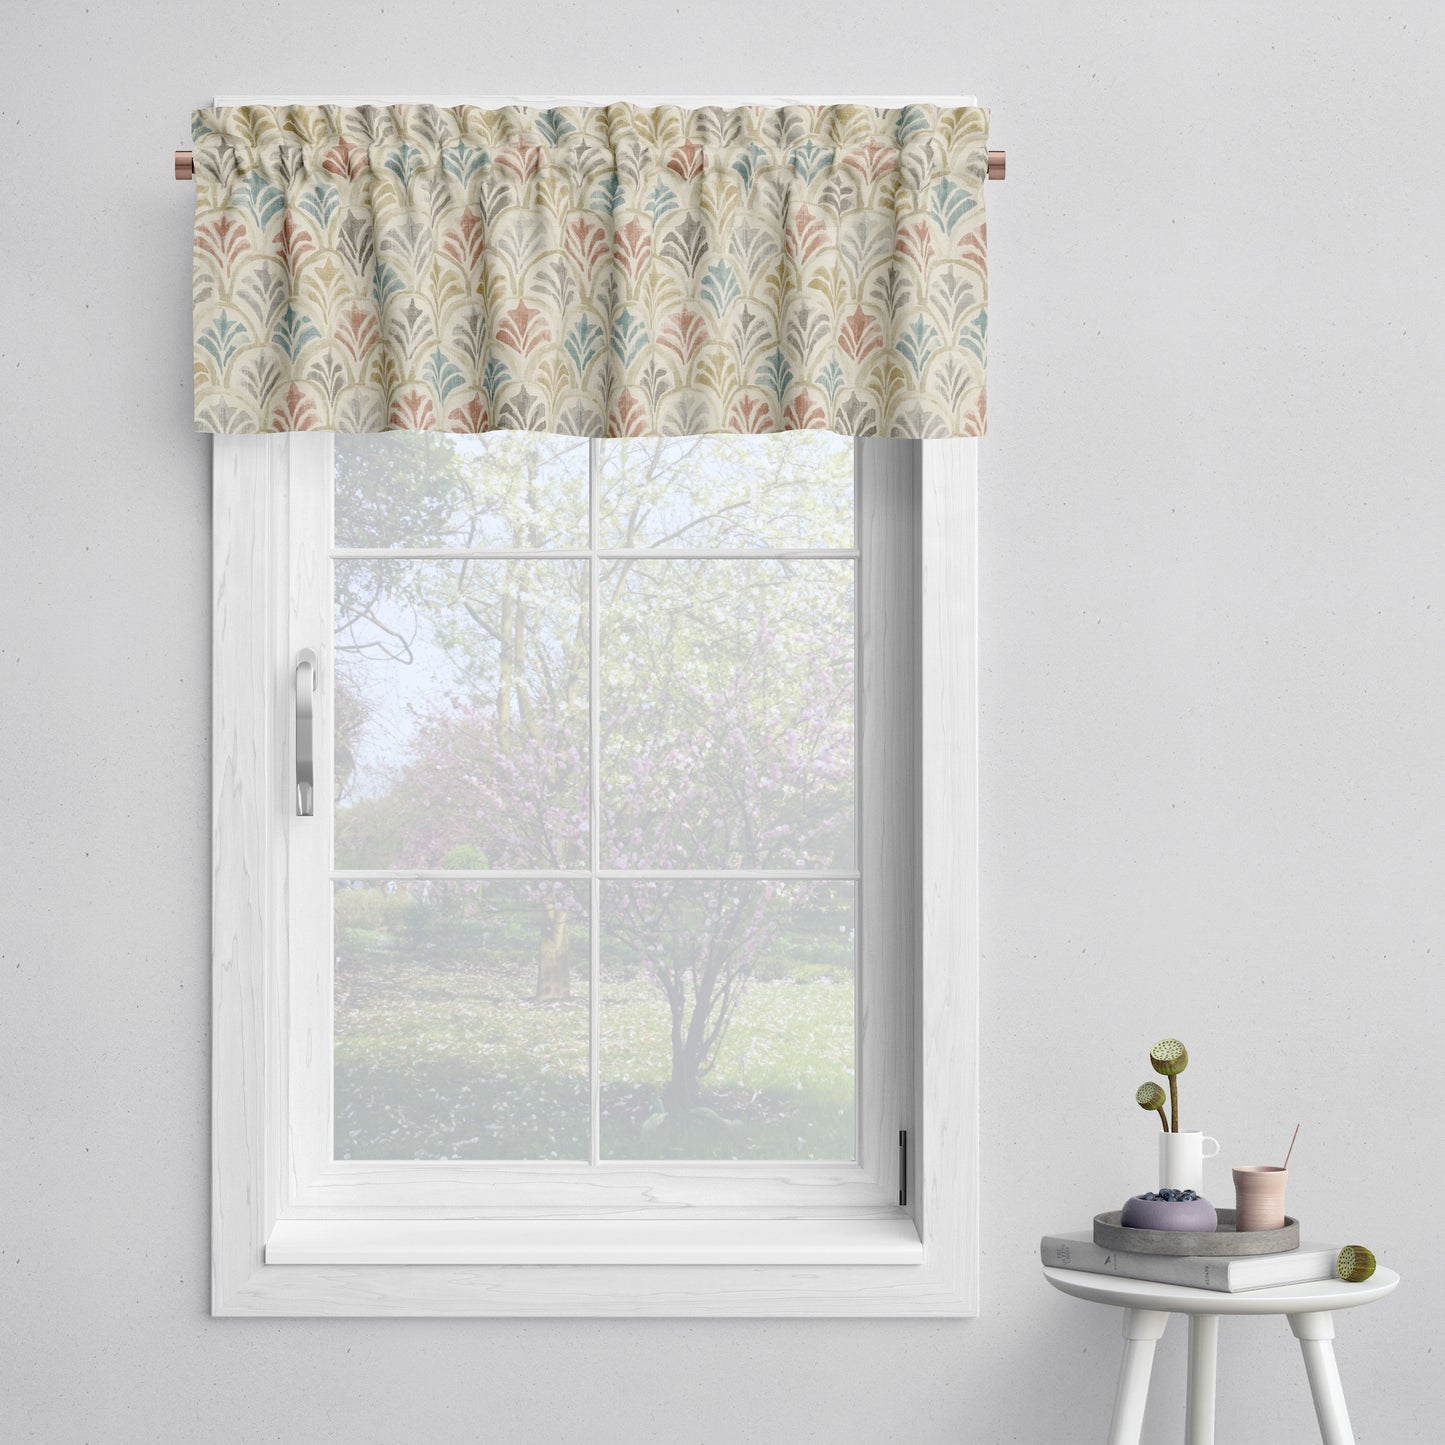 Tailored Valance in Countess Tuscan Scallop Watercolor- Blue, Terracotta, Gray, Tan